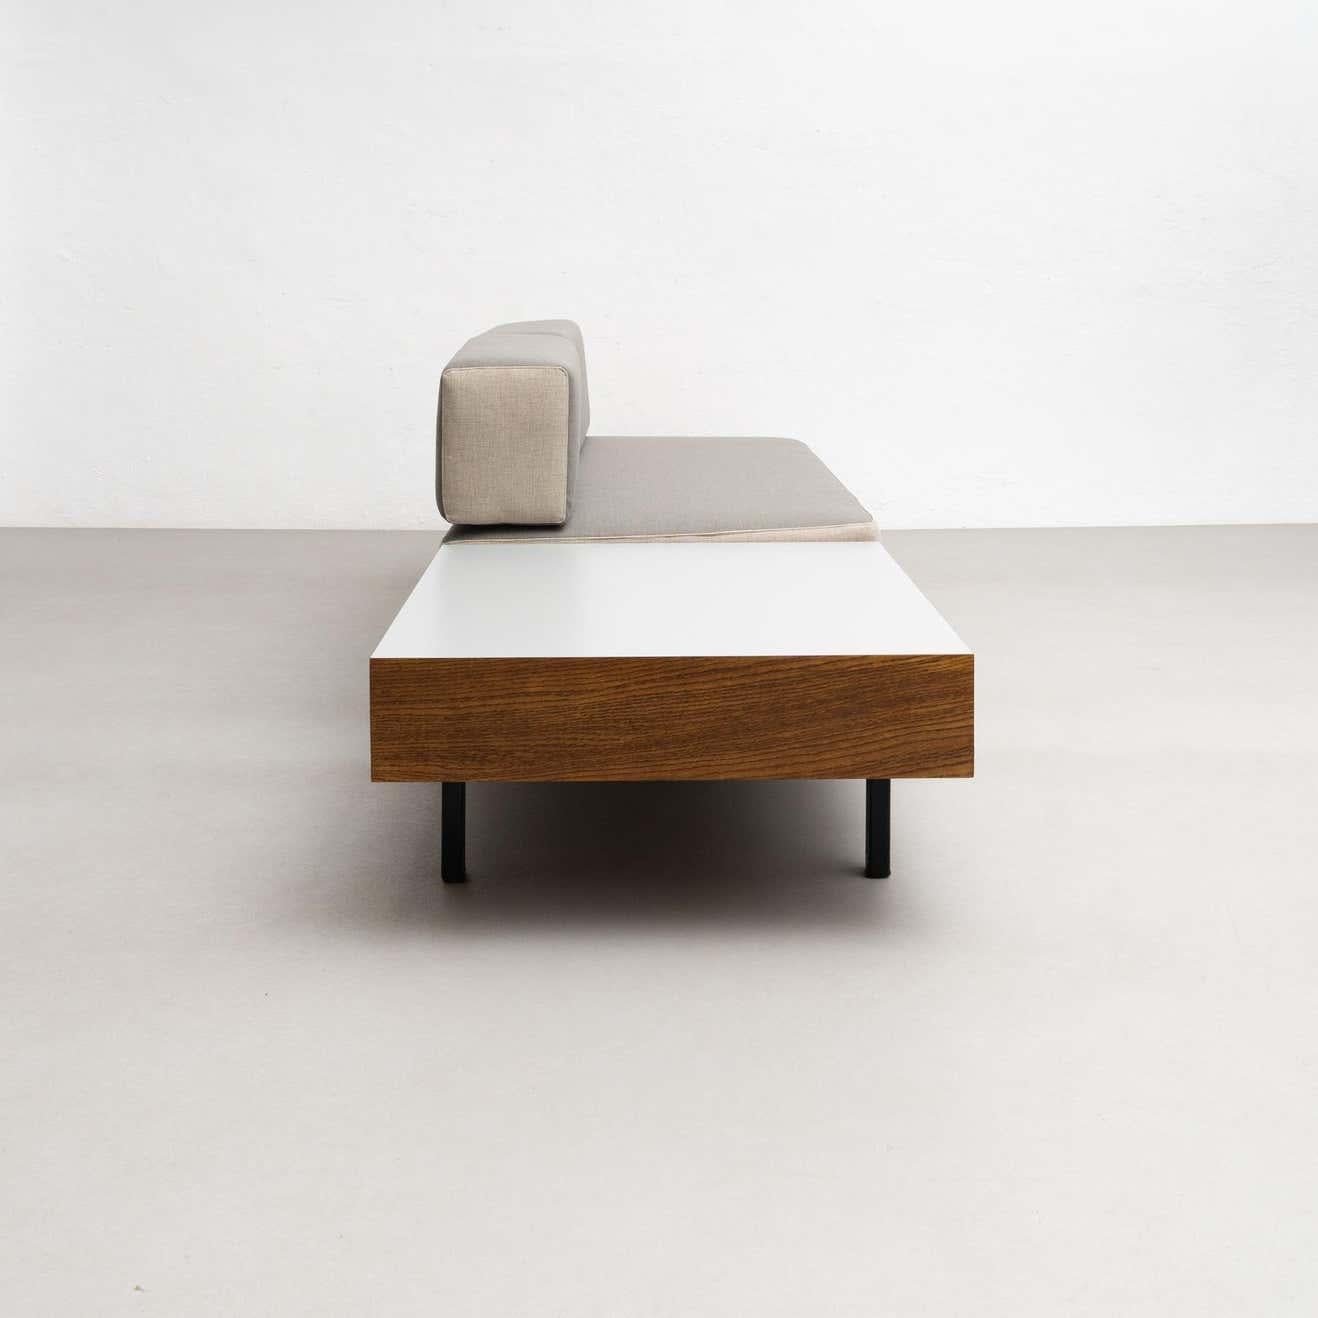 Charlotte Perriand Cansado Bench with a Drawer, circa 1958 For Sale 10